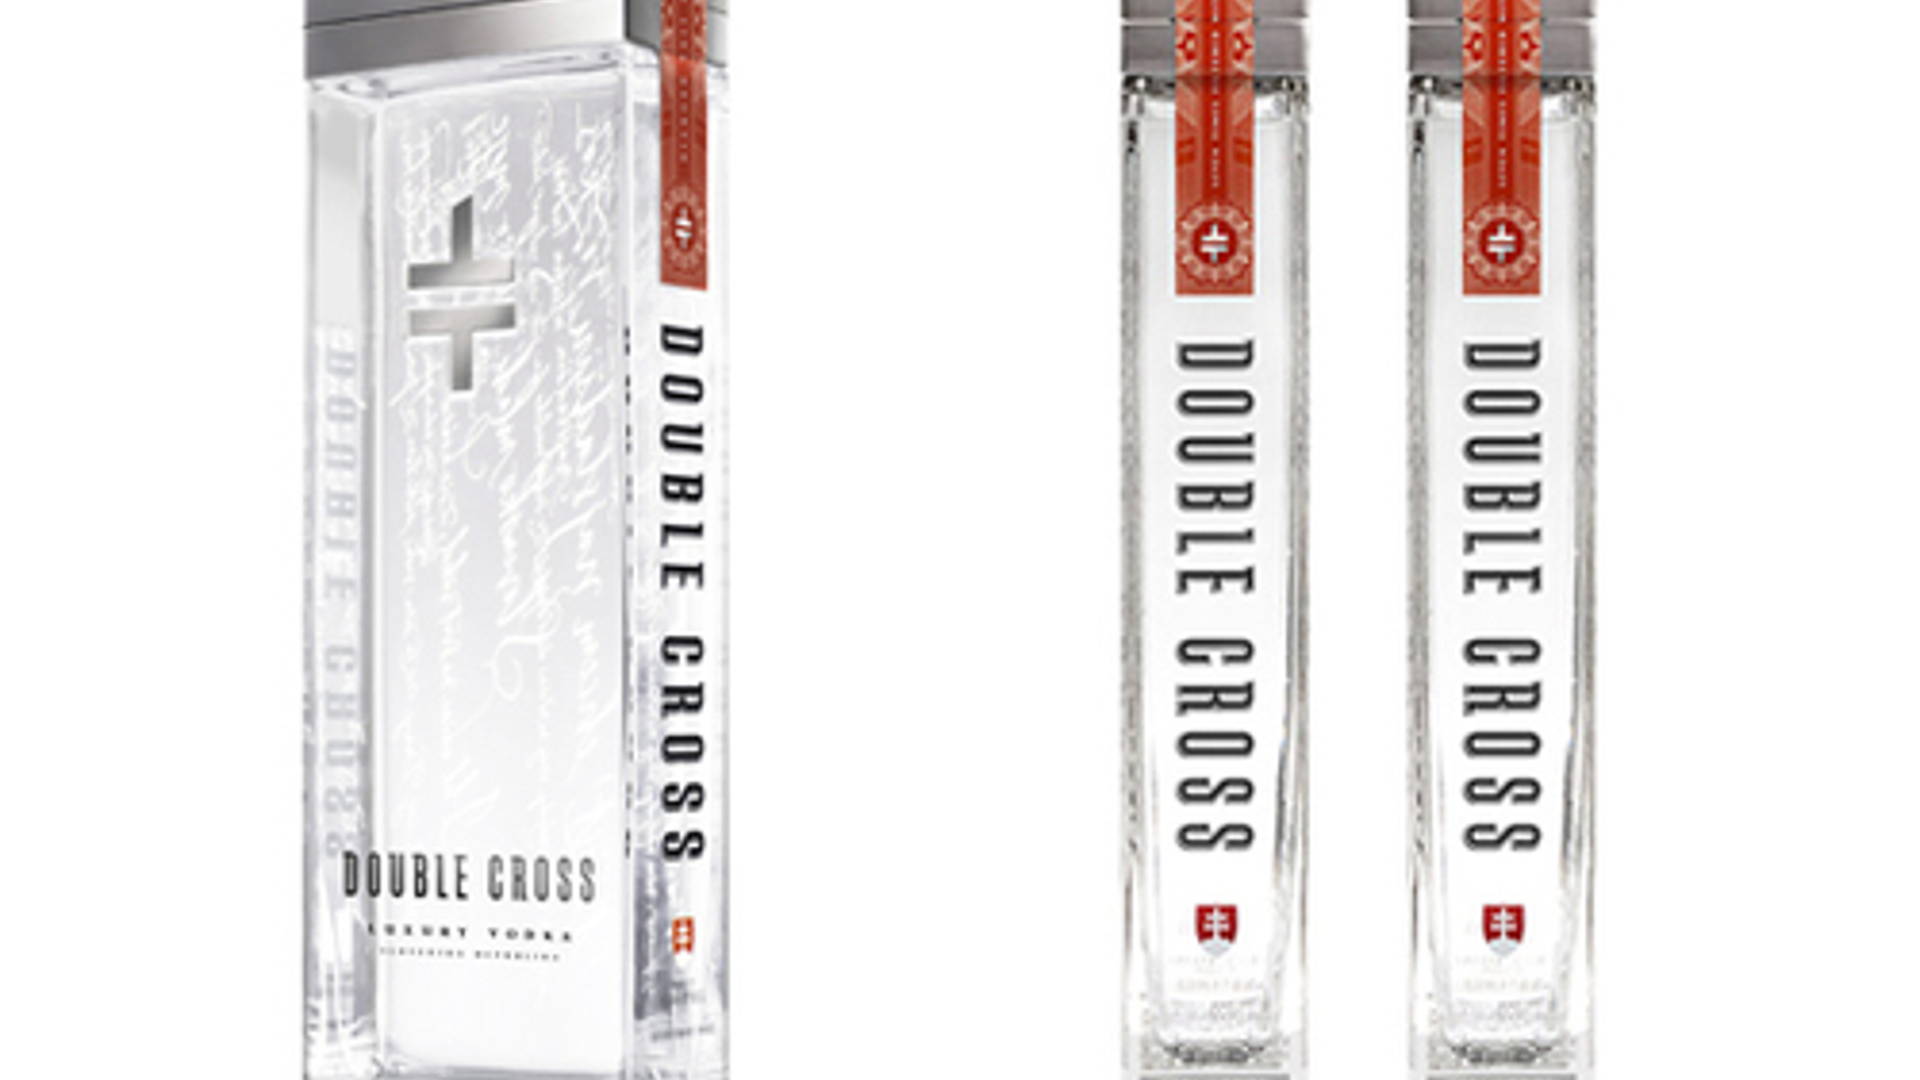 Featured image for Double Cross Vodka